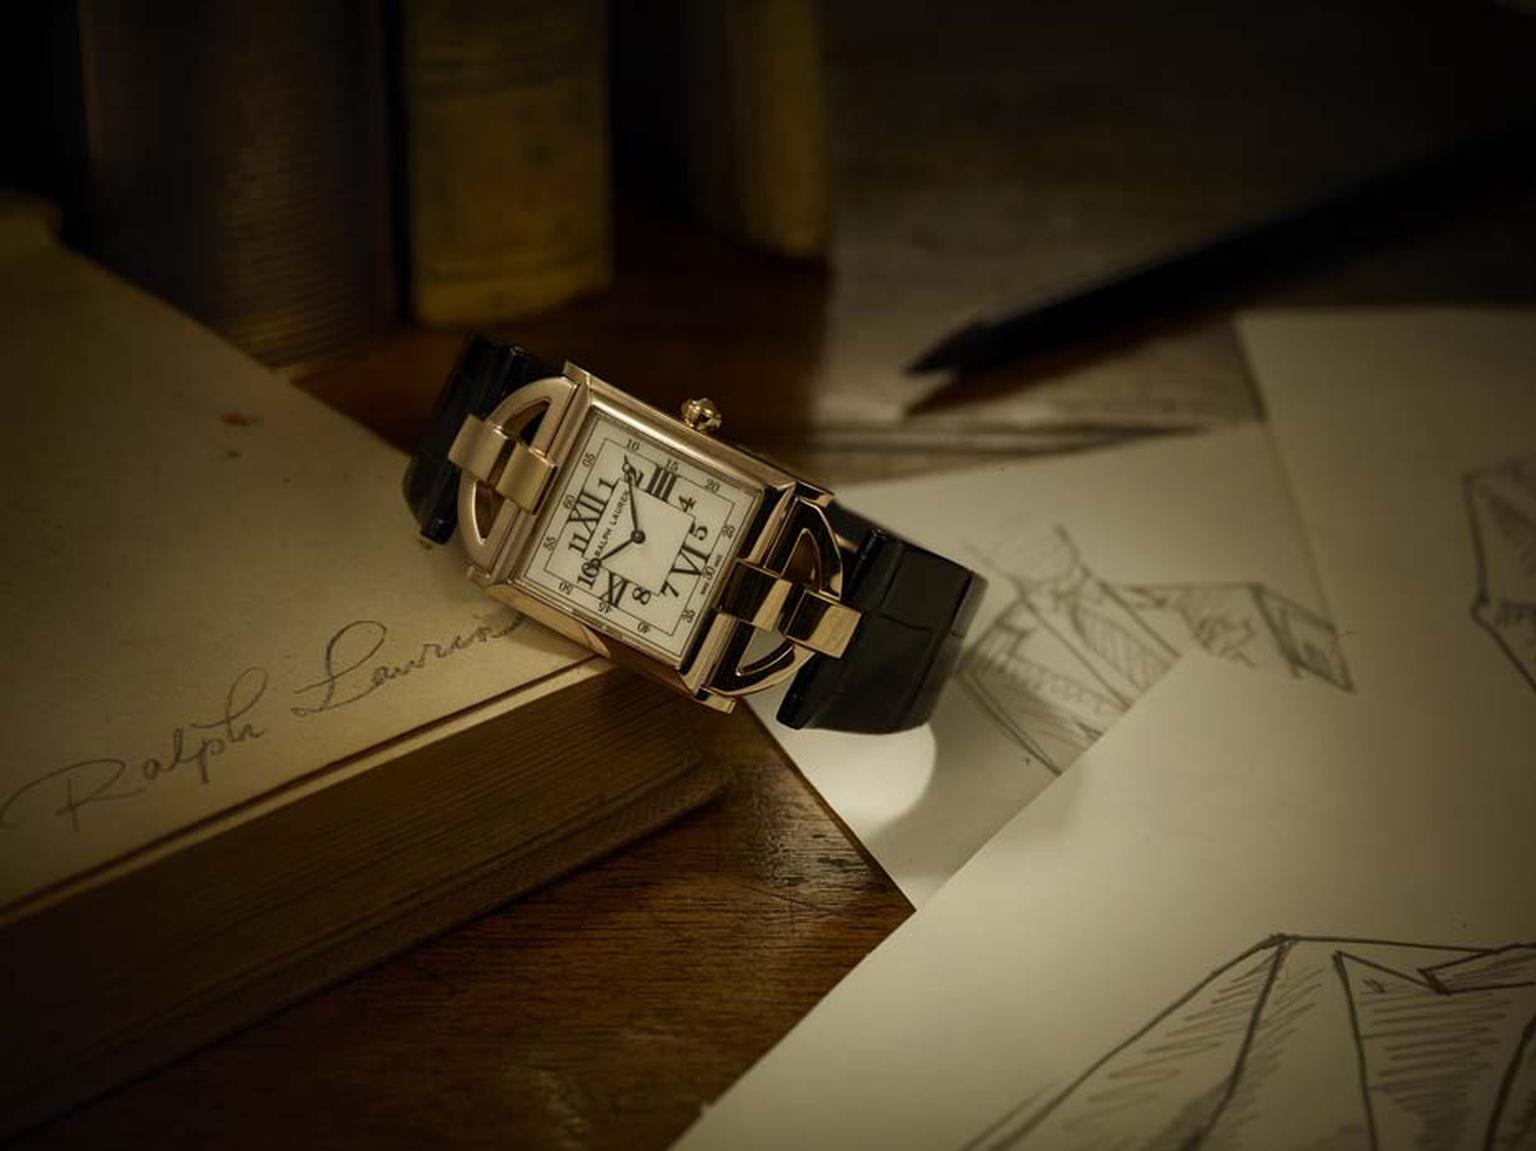 The handsome new Ralph Lauren 867 Connoisseur watch will be available in either a rose or white gold 27.5mm case from Ralph Lauren stores starting 15 December 2014.